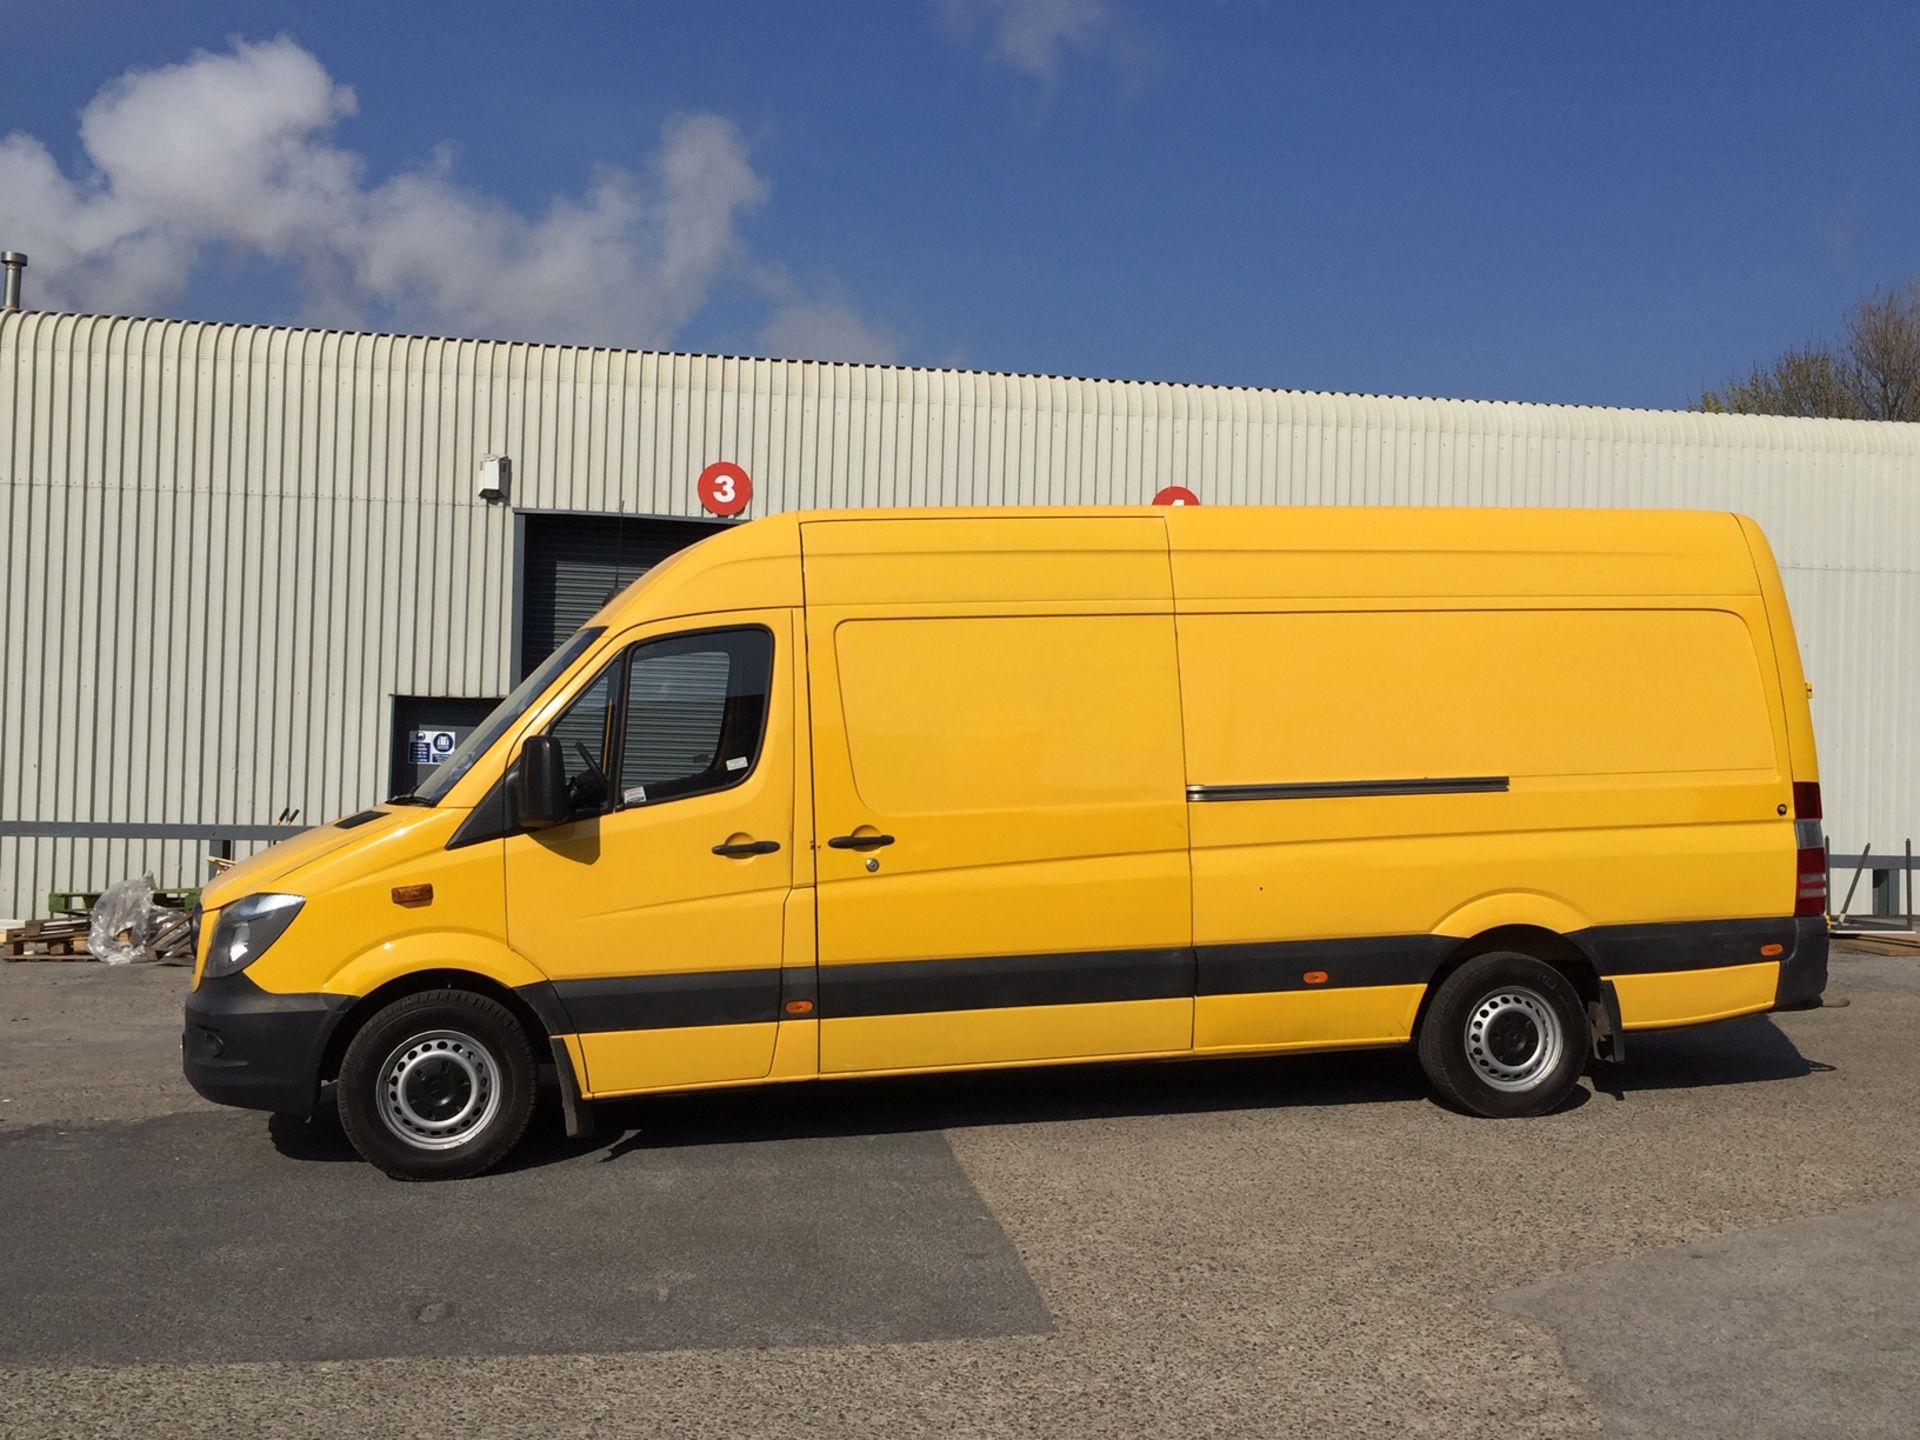 Mercedes sprinter 313CDi LWB 3.5 tonne 1 plc owner from new - Image 5 of 5